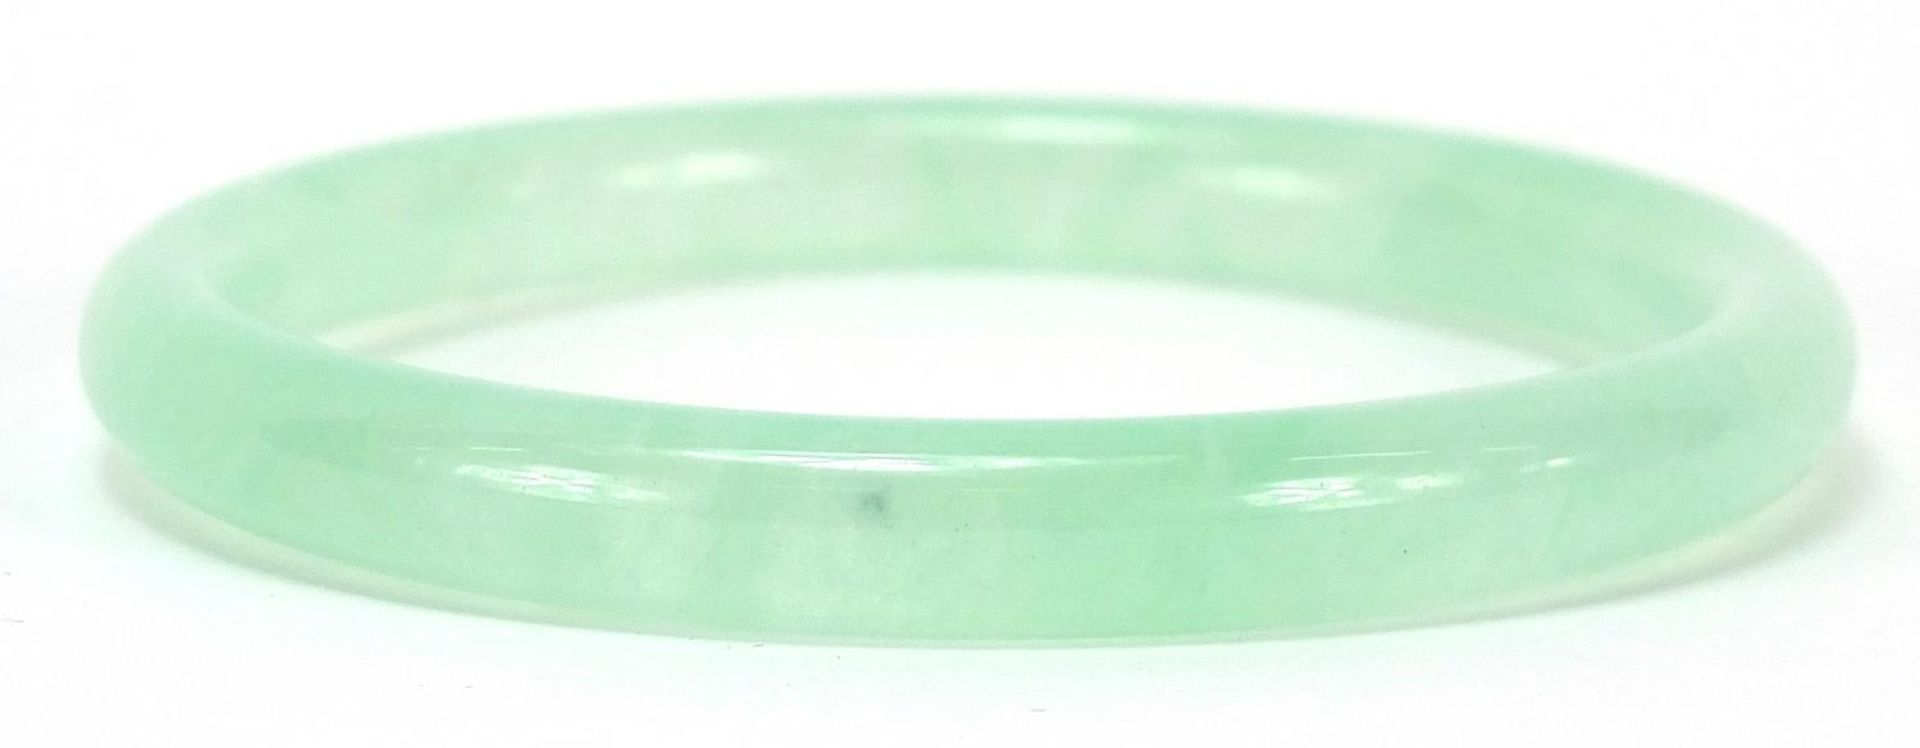 Chinese pale green jade bangle, 7.5cm in diameter, 27.0g - Image 2 of 2